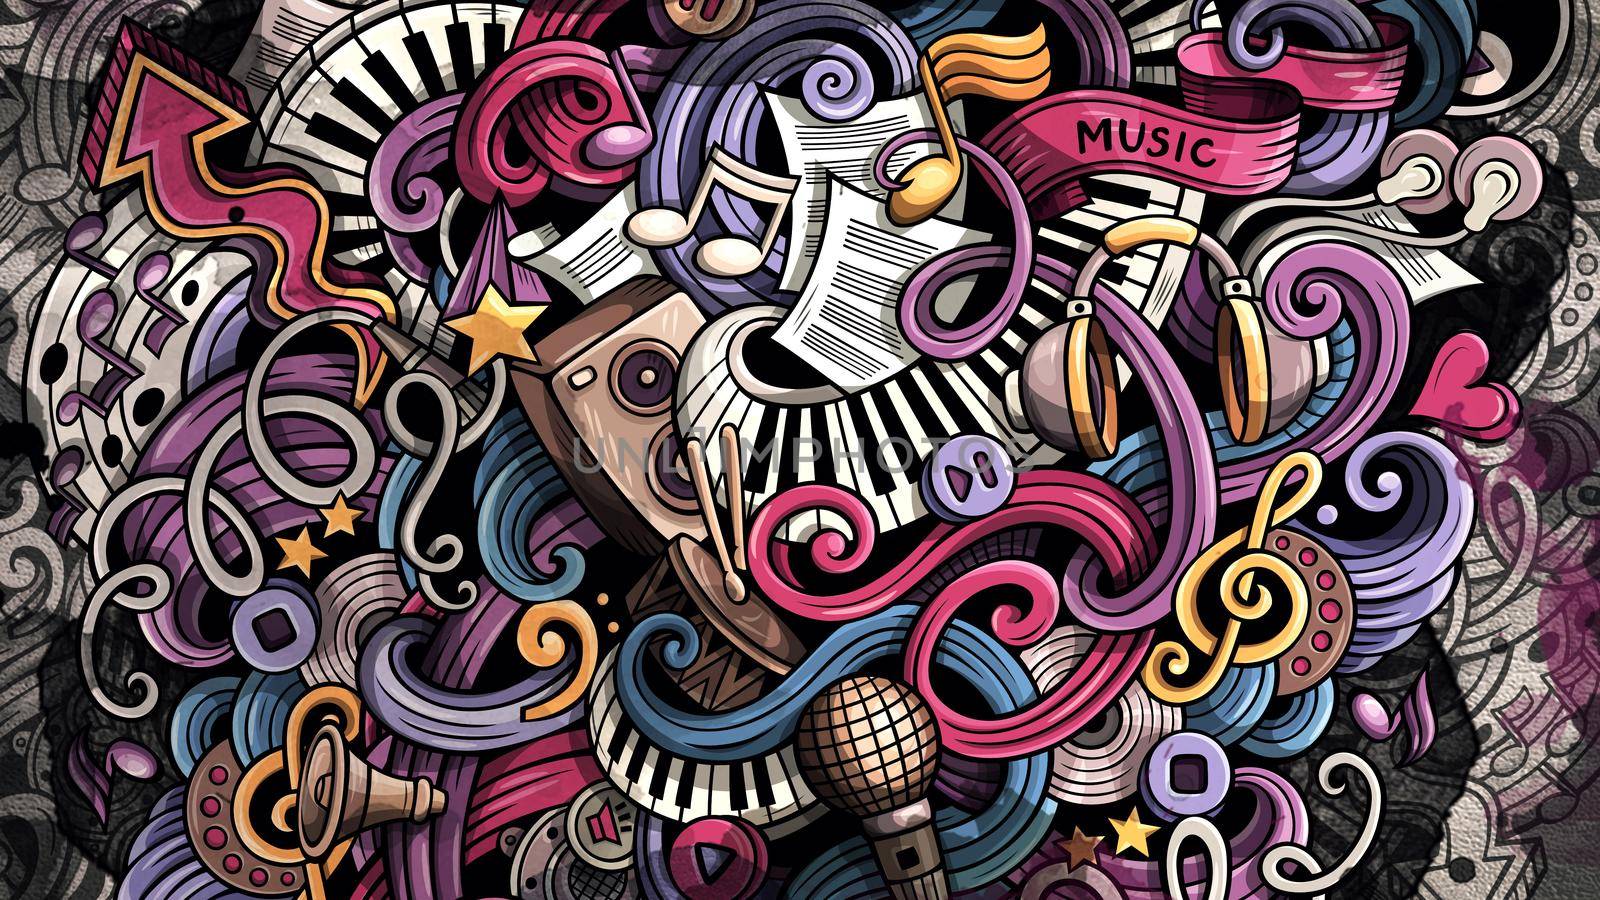 Doodles Musical illustration. Creative music background. Colorful stylish raster wallpaper.